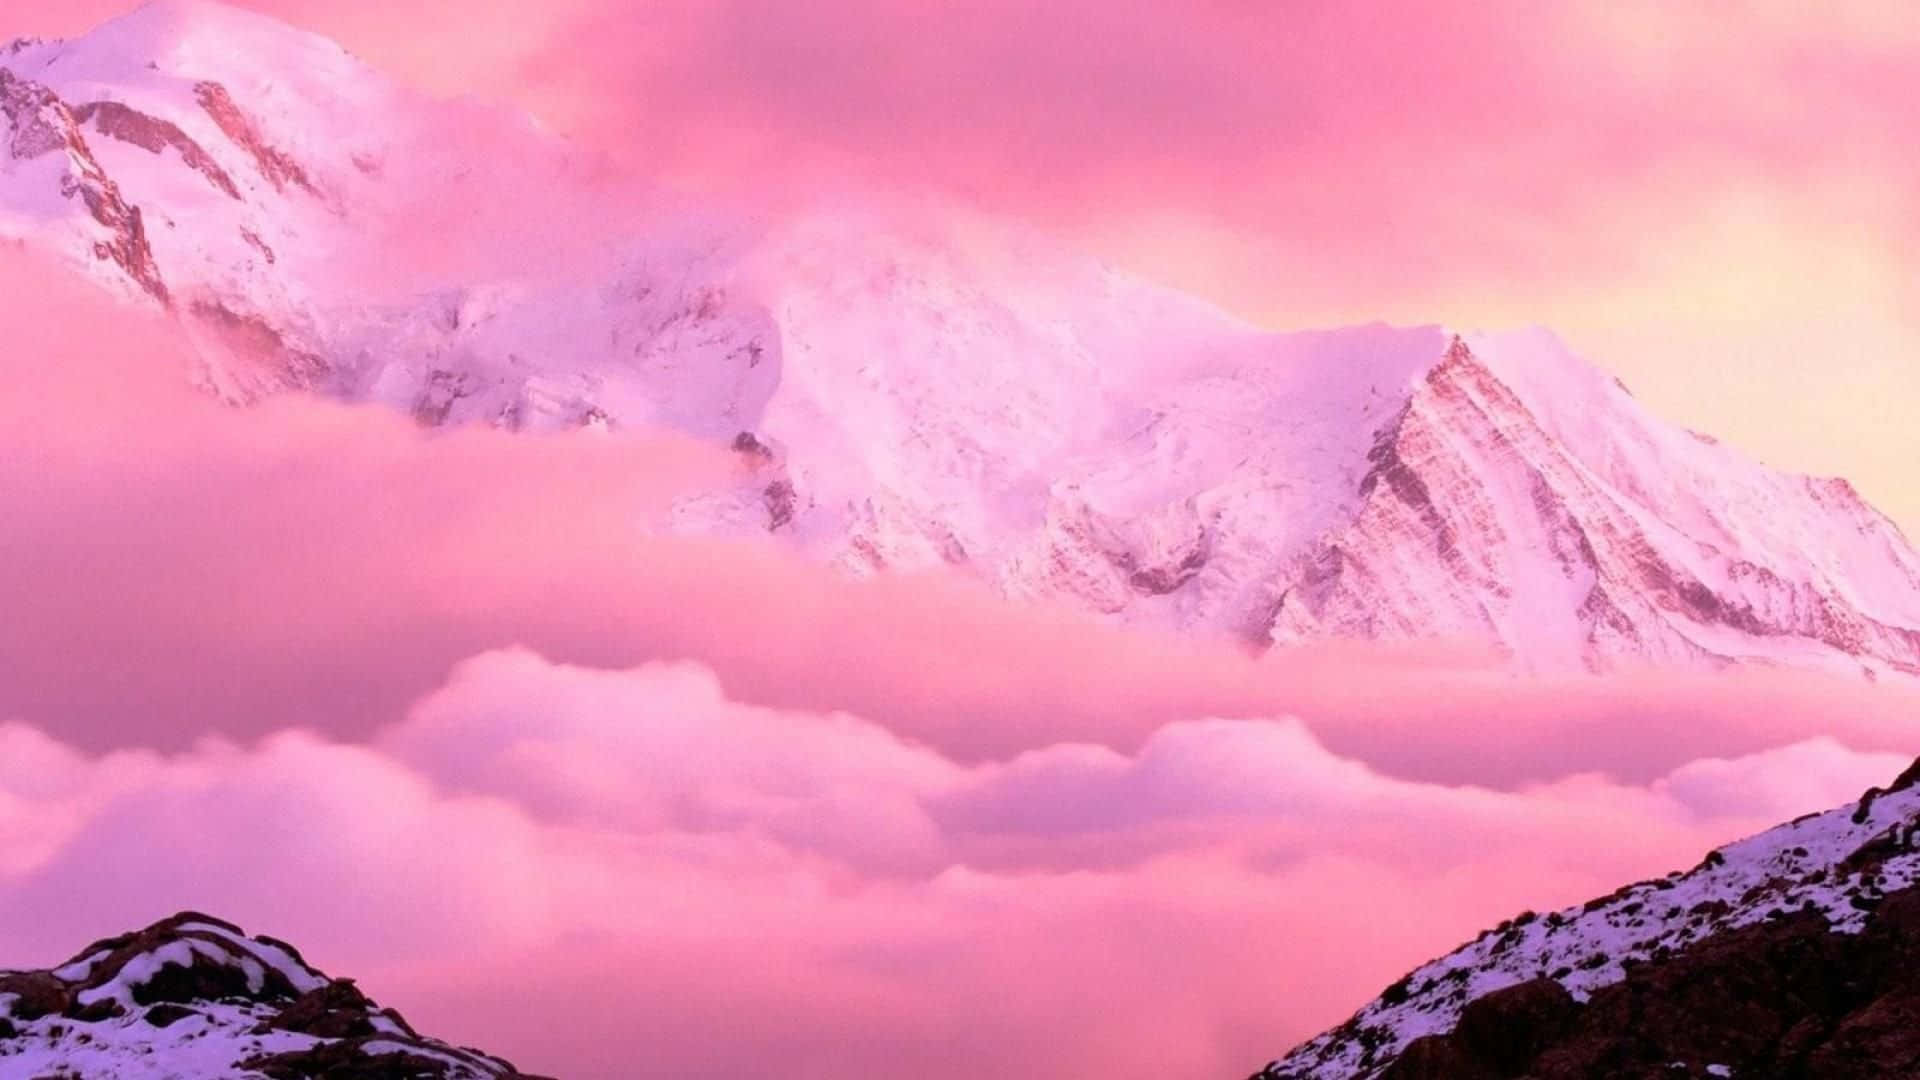 Top 999+ Aesthetic Sky Wallpaper Full HD, 4K✓Free to Use